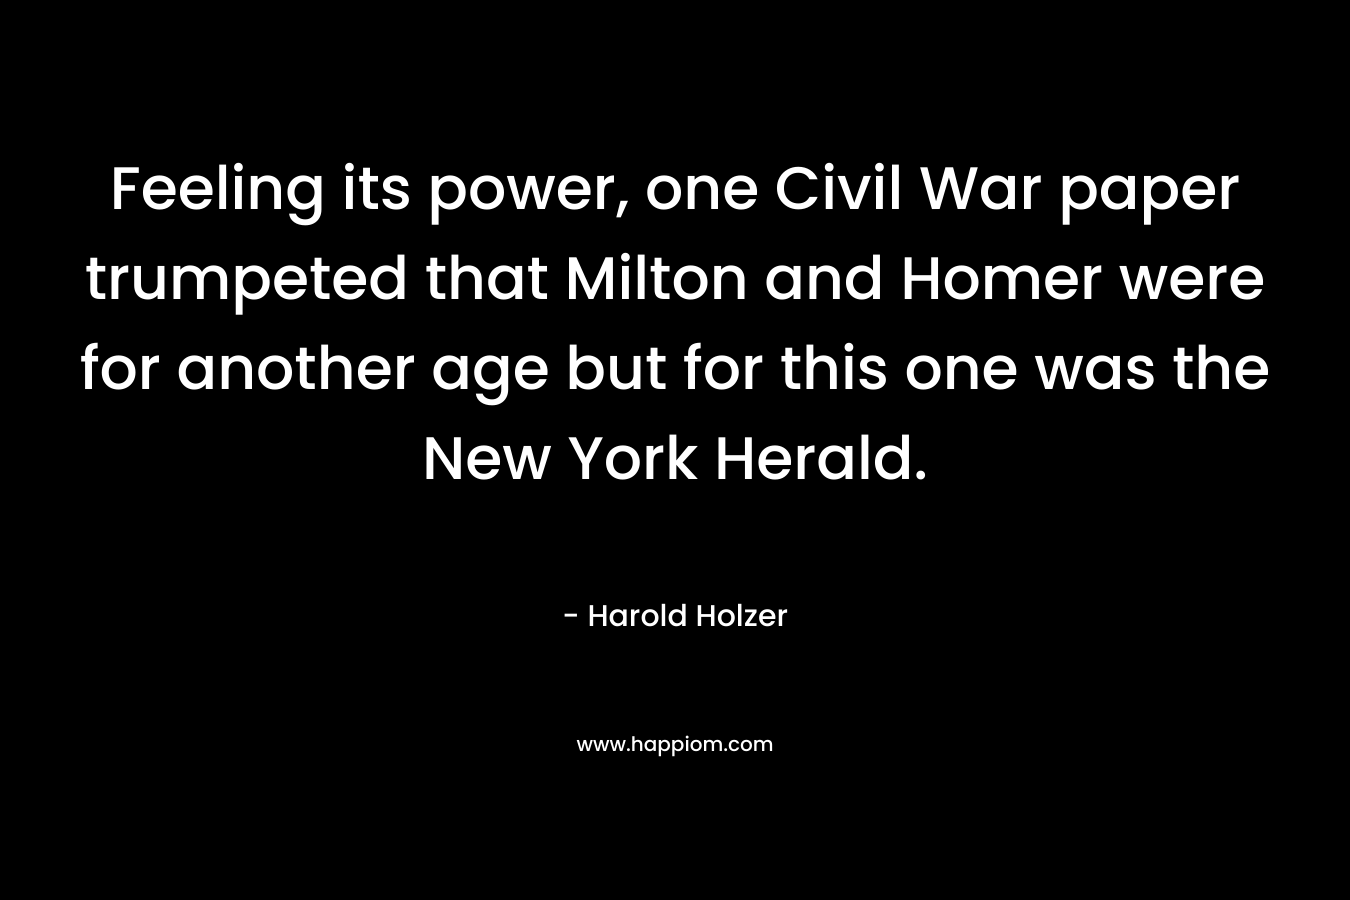 Feeling its power, one Civil War paper trumpeted that Milton and Homer were for another age but for this one was the New York Herald. – Harold Holzer